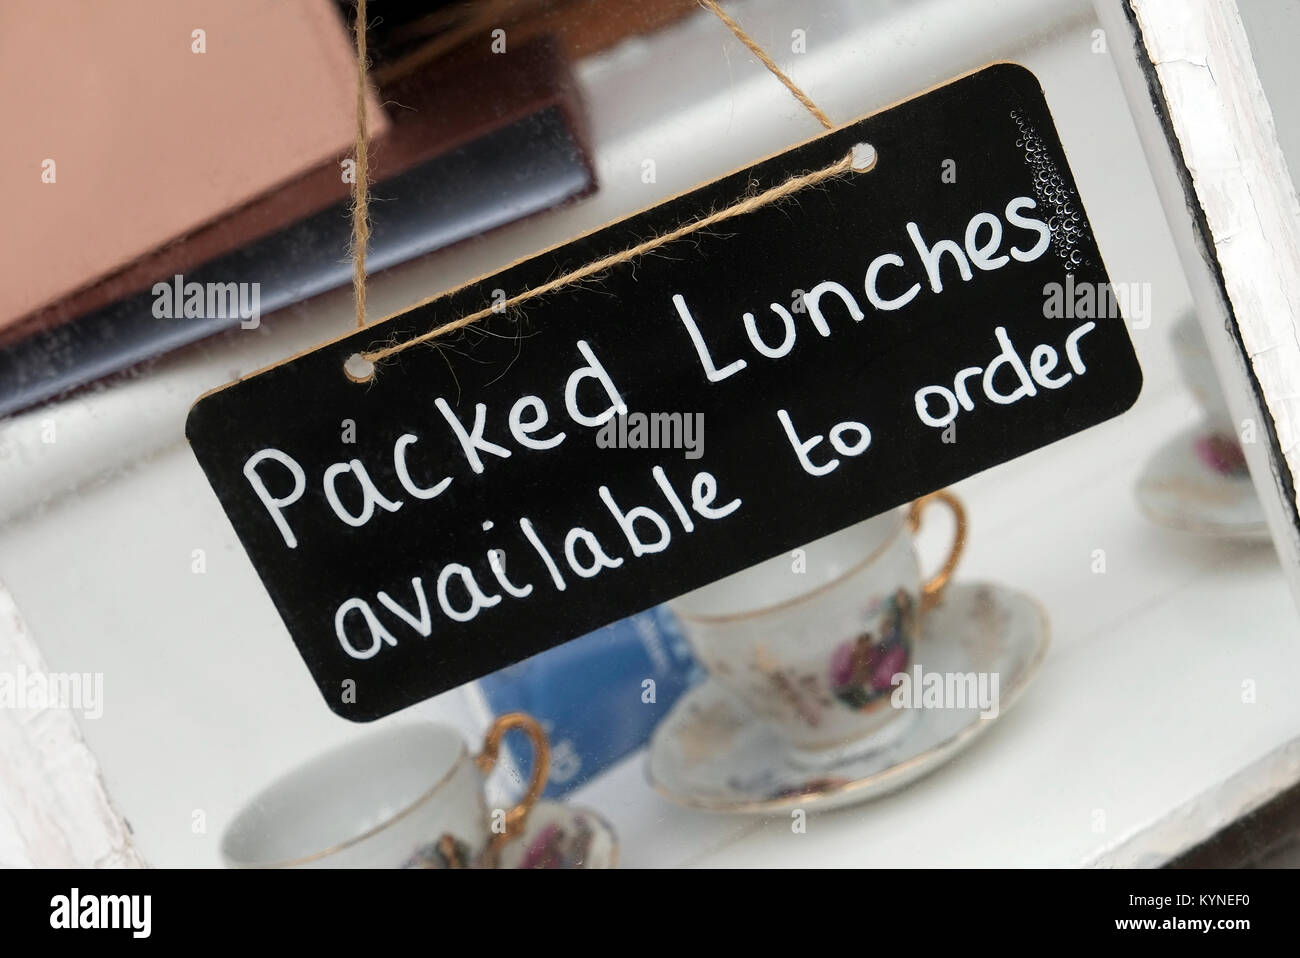 packed lunches available to order sign in cafe window Stock Photo